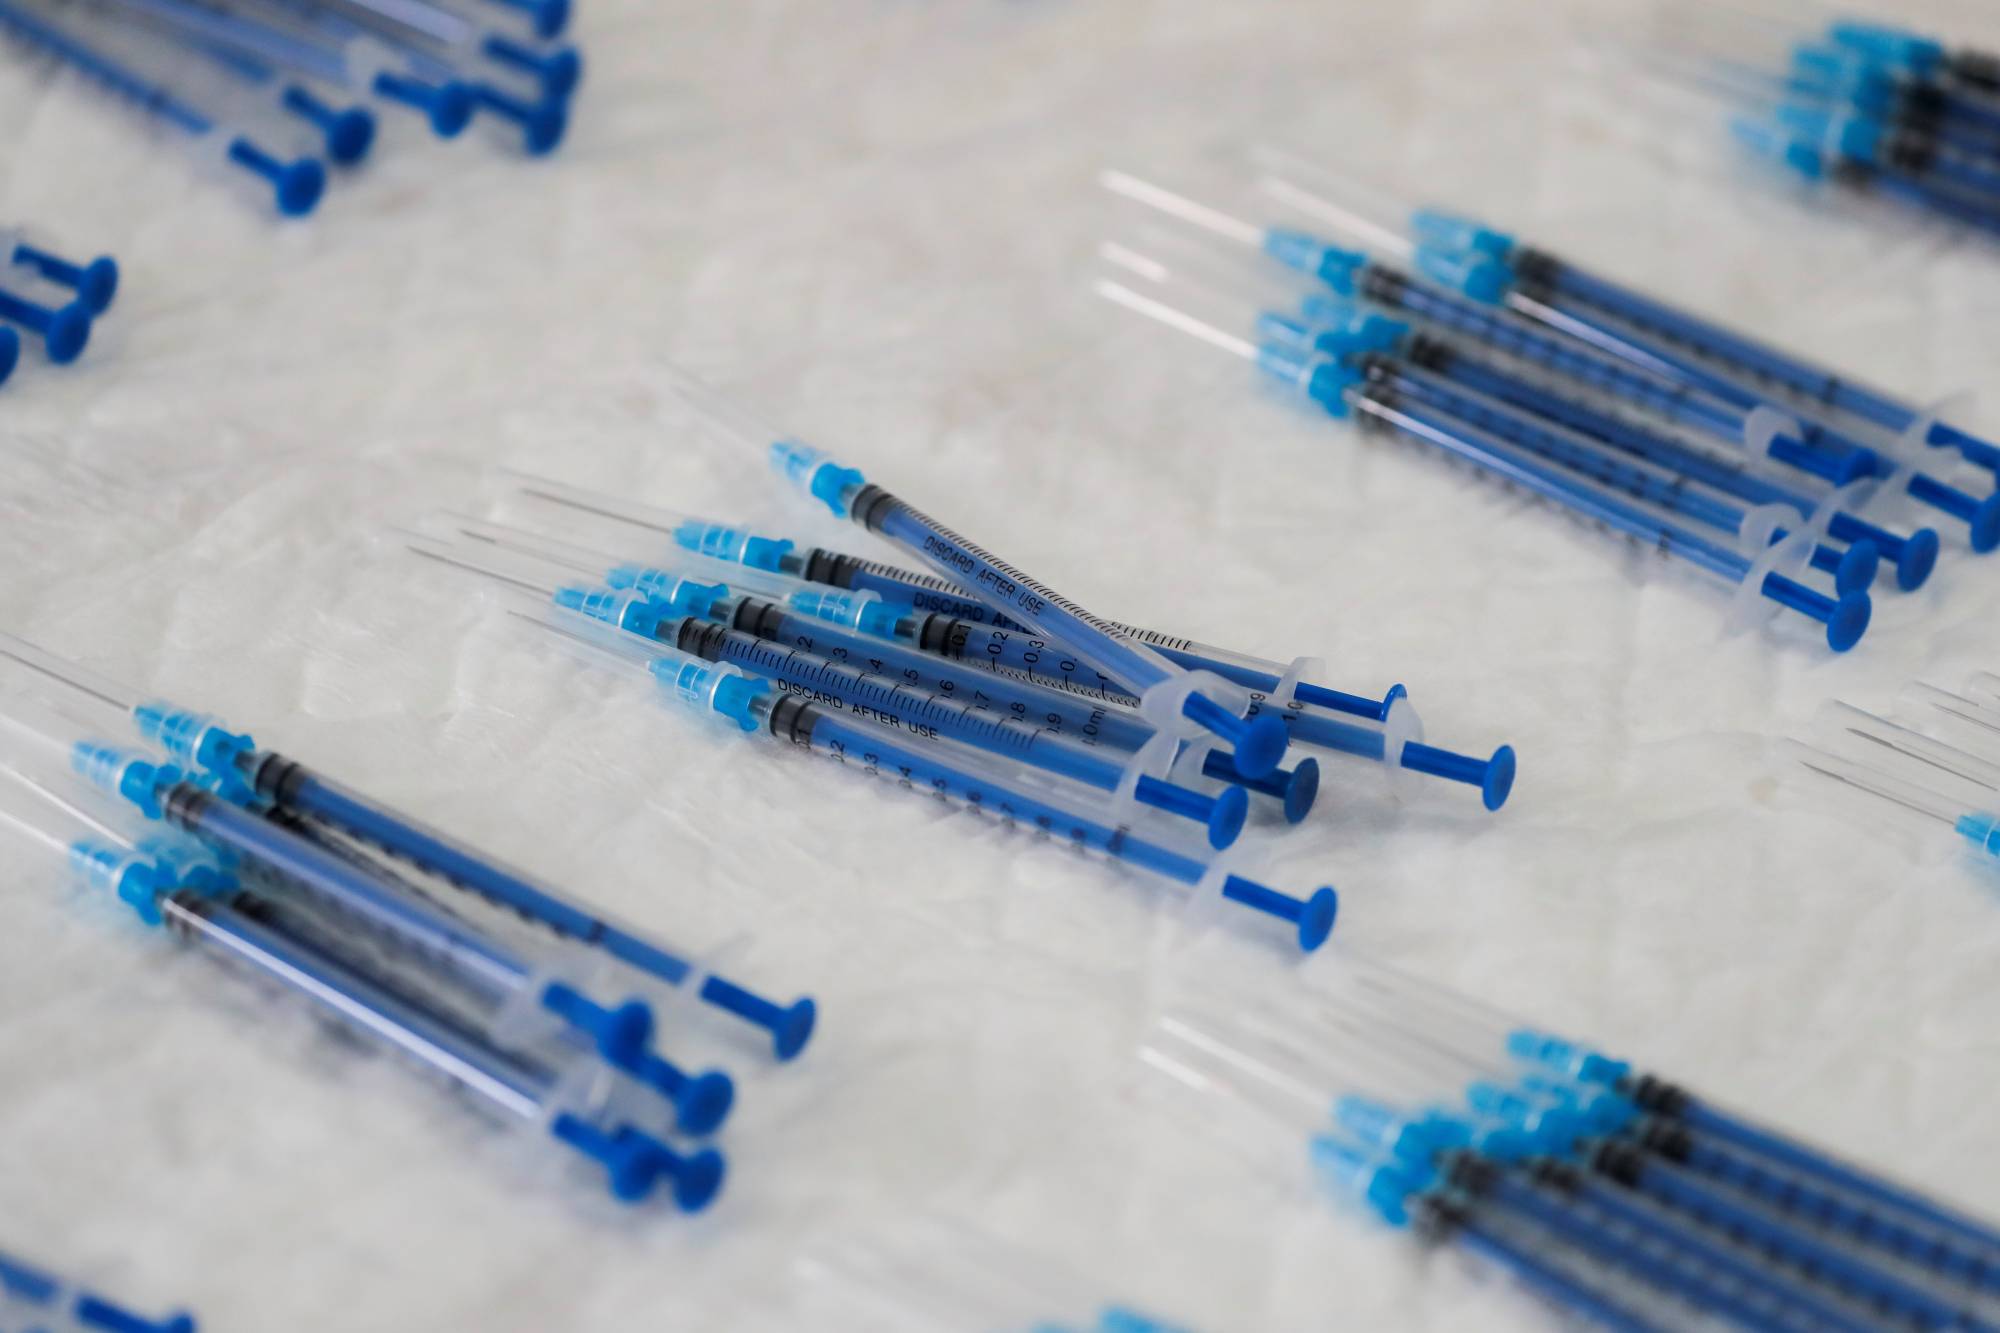 Japan is scrambling to secure special syringes that can draw six shots of the Pfizer-BioNTech COVID-19 vaccine shots from each vial. | REUTERS